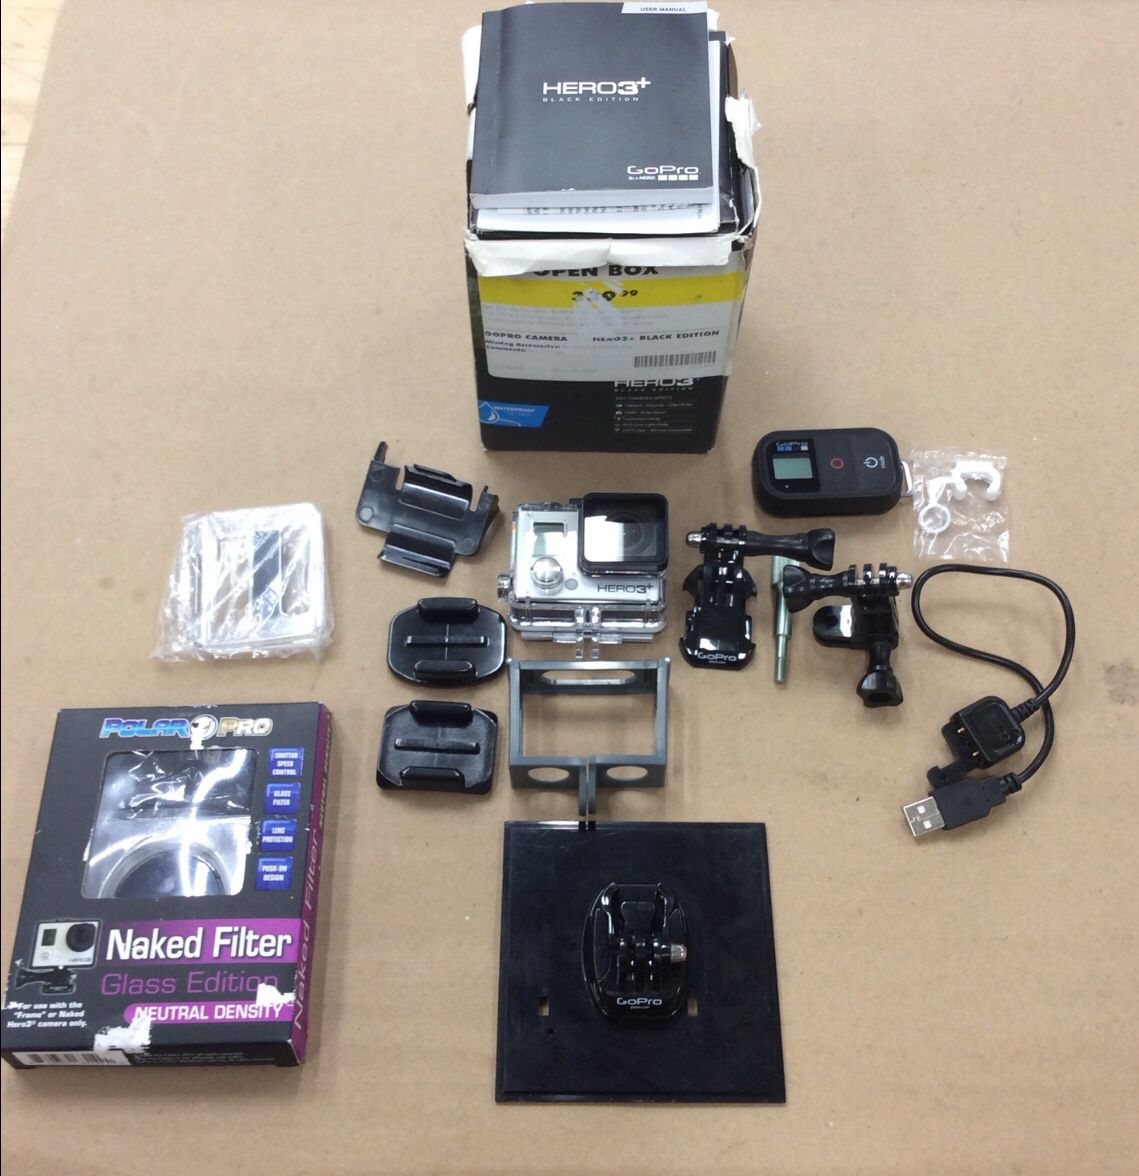 GoPro Hero3+ w/ WiFi Remote, Filter, Mounts and Accessories (19-117)